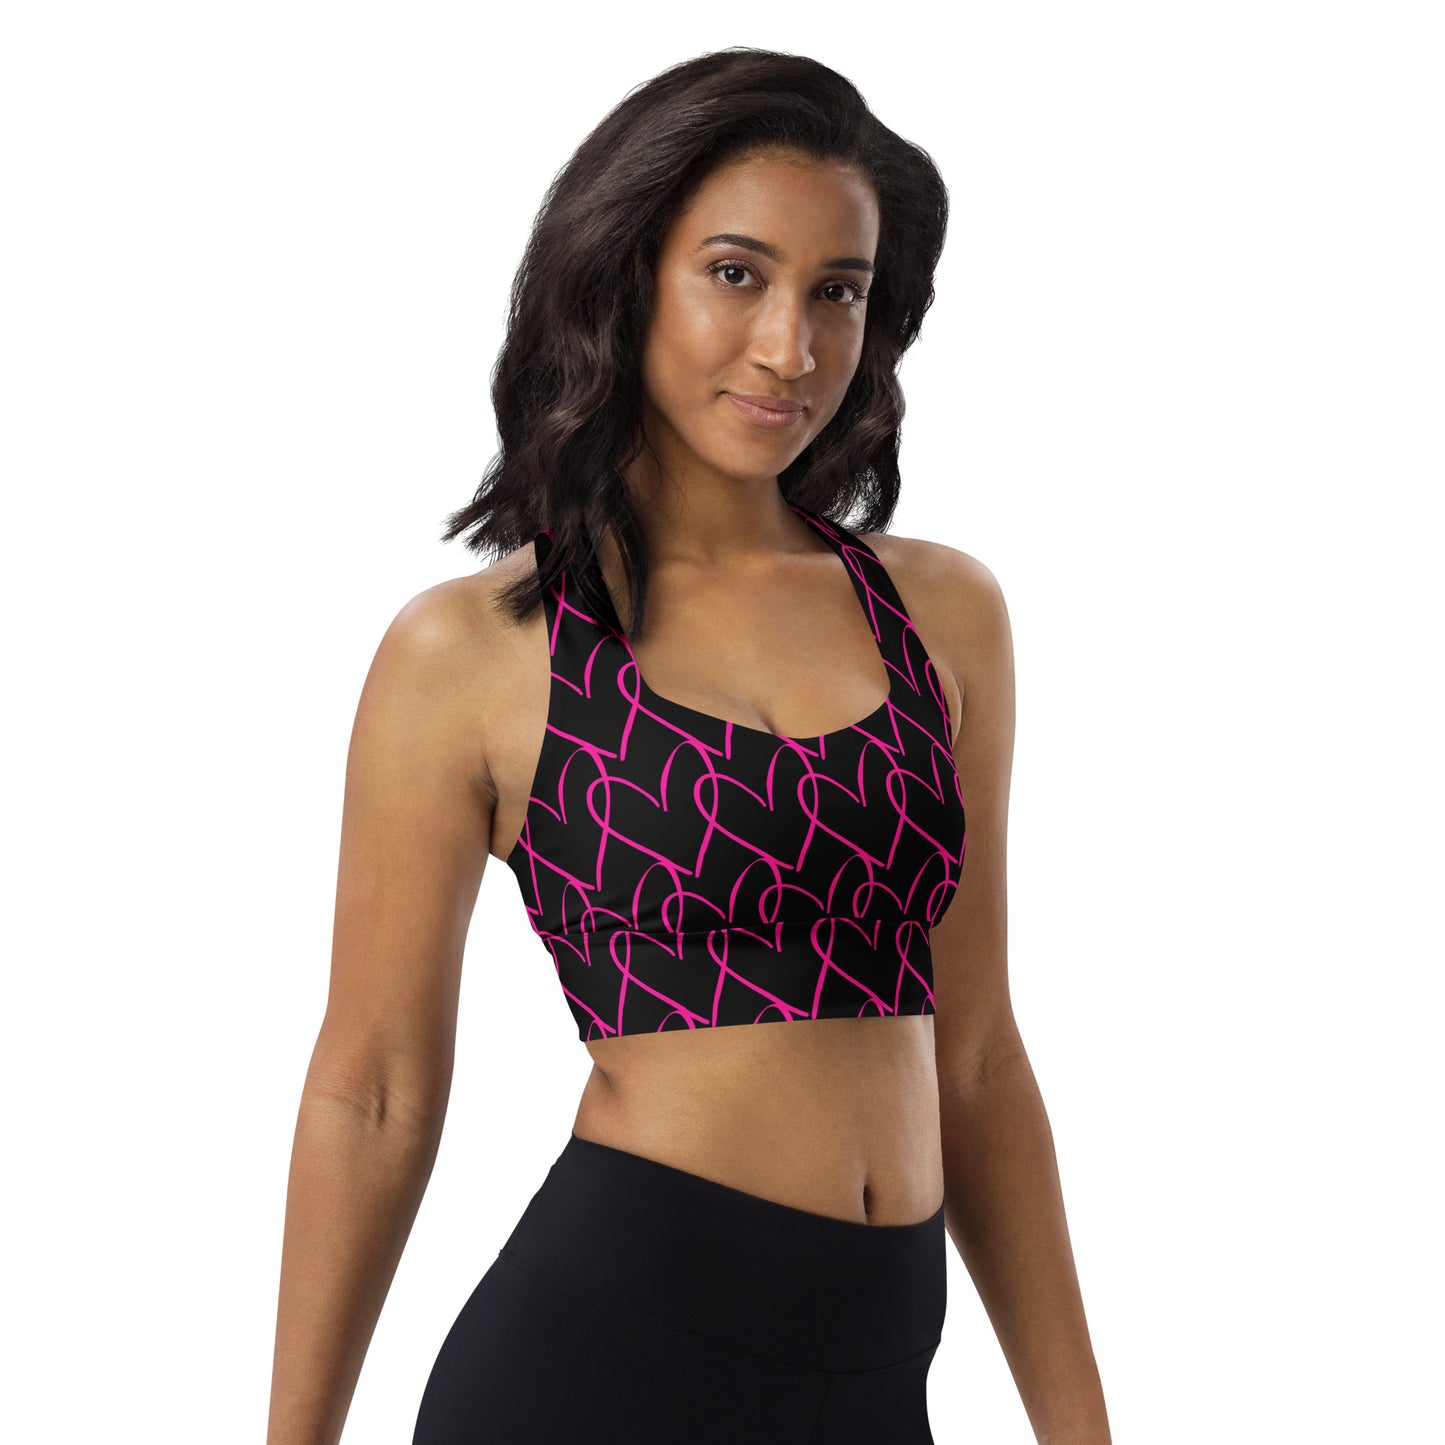 ICONIC Heart Max Support Sports Bra